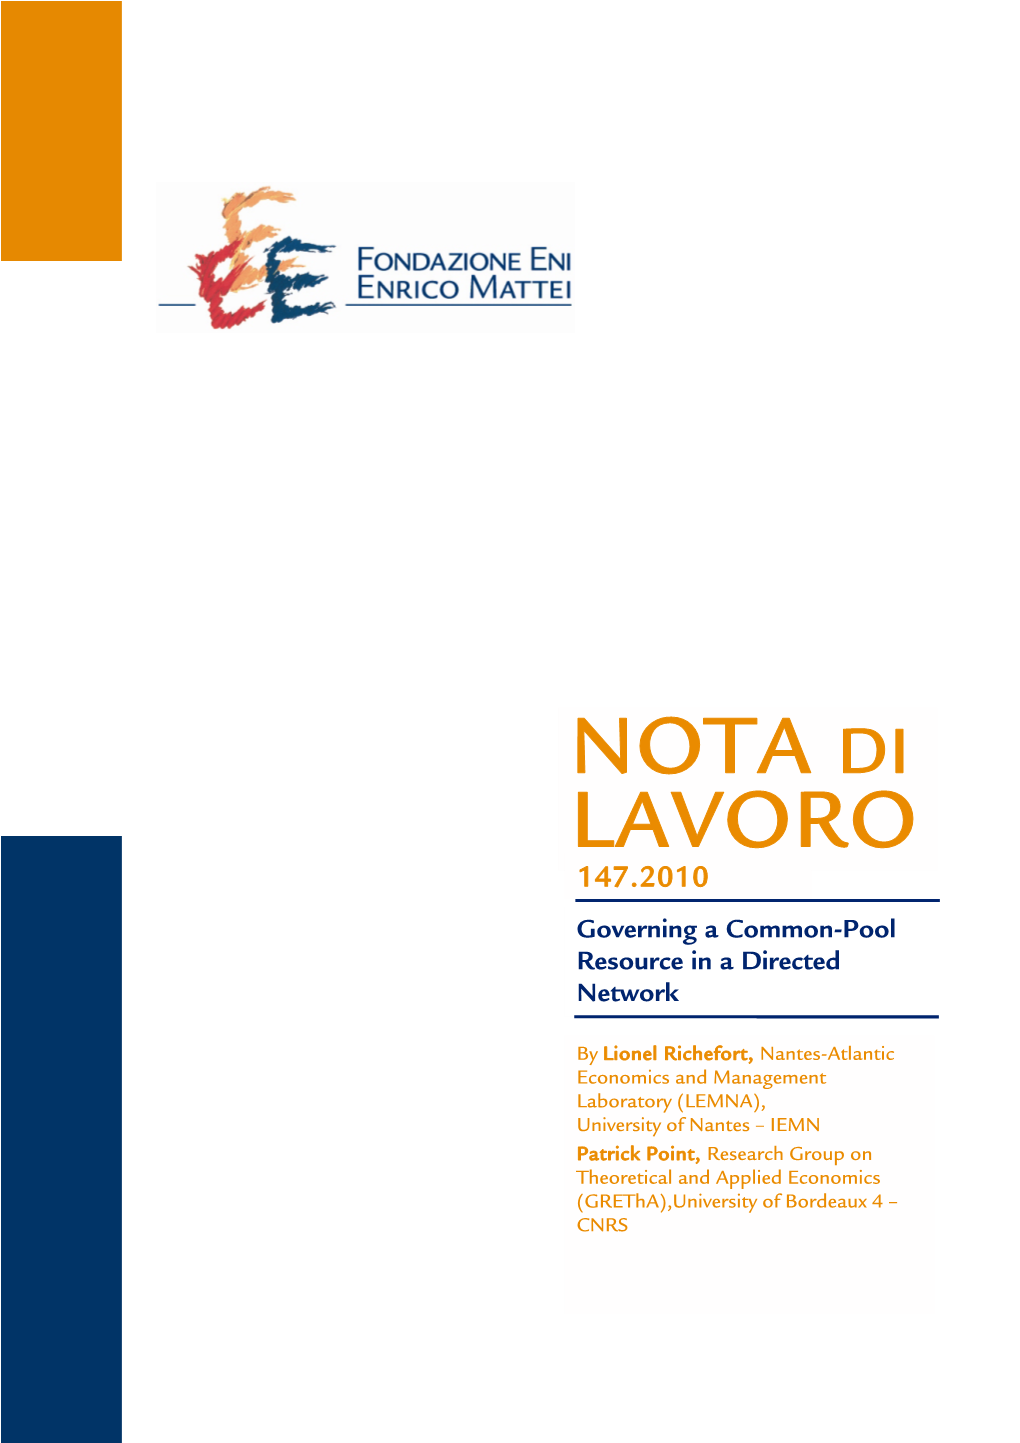 NOTA DI LAVORO 147.2010 Governing a Common-Pool Resource in a Directed Network